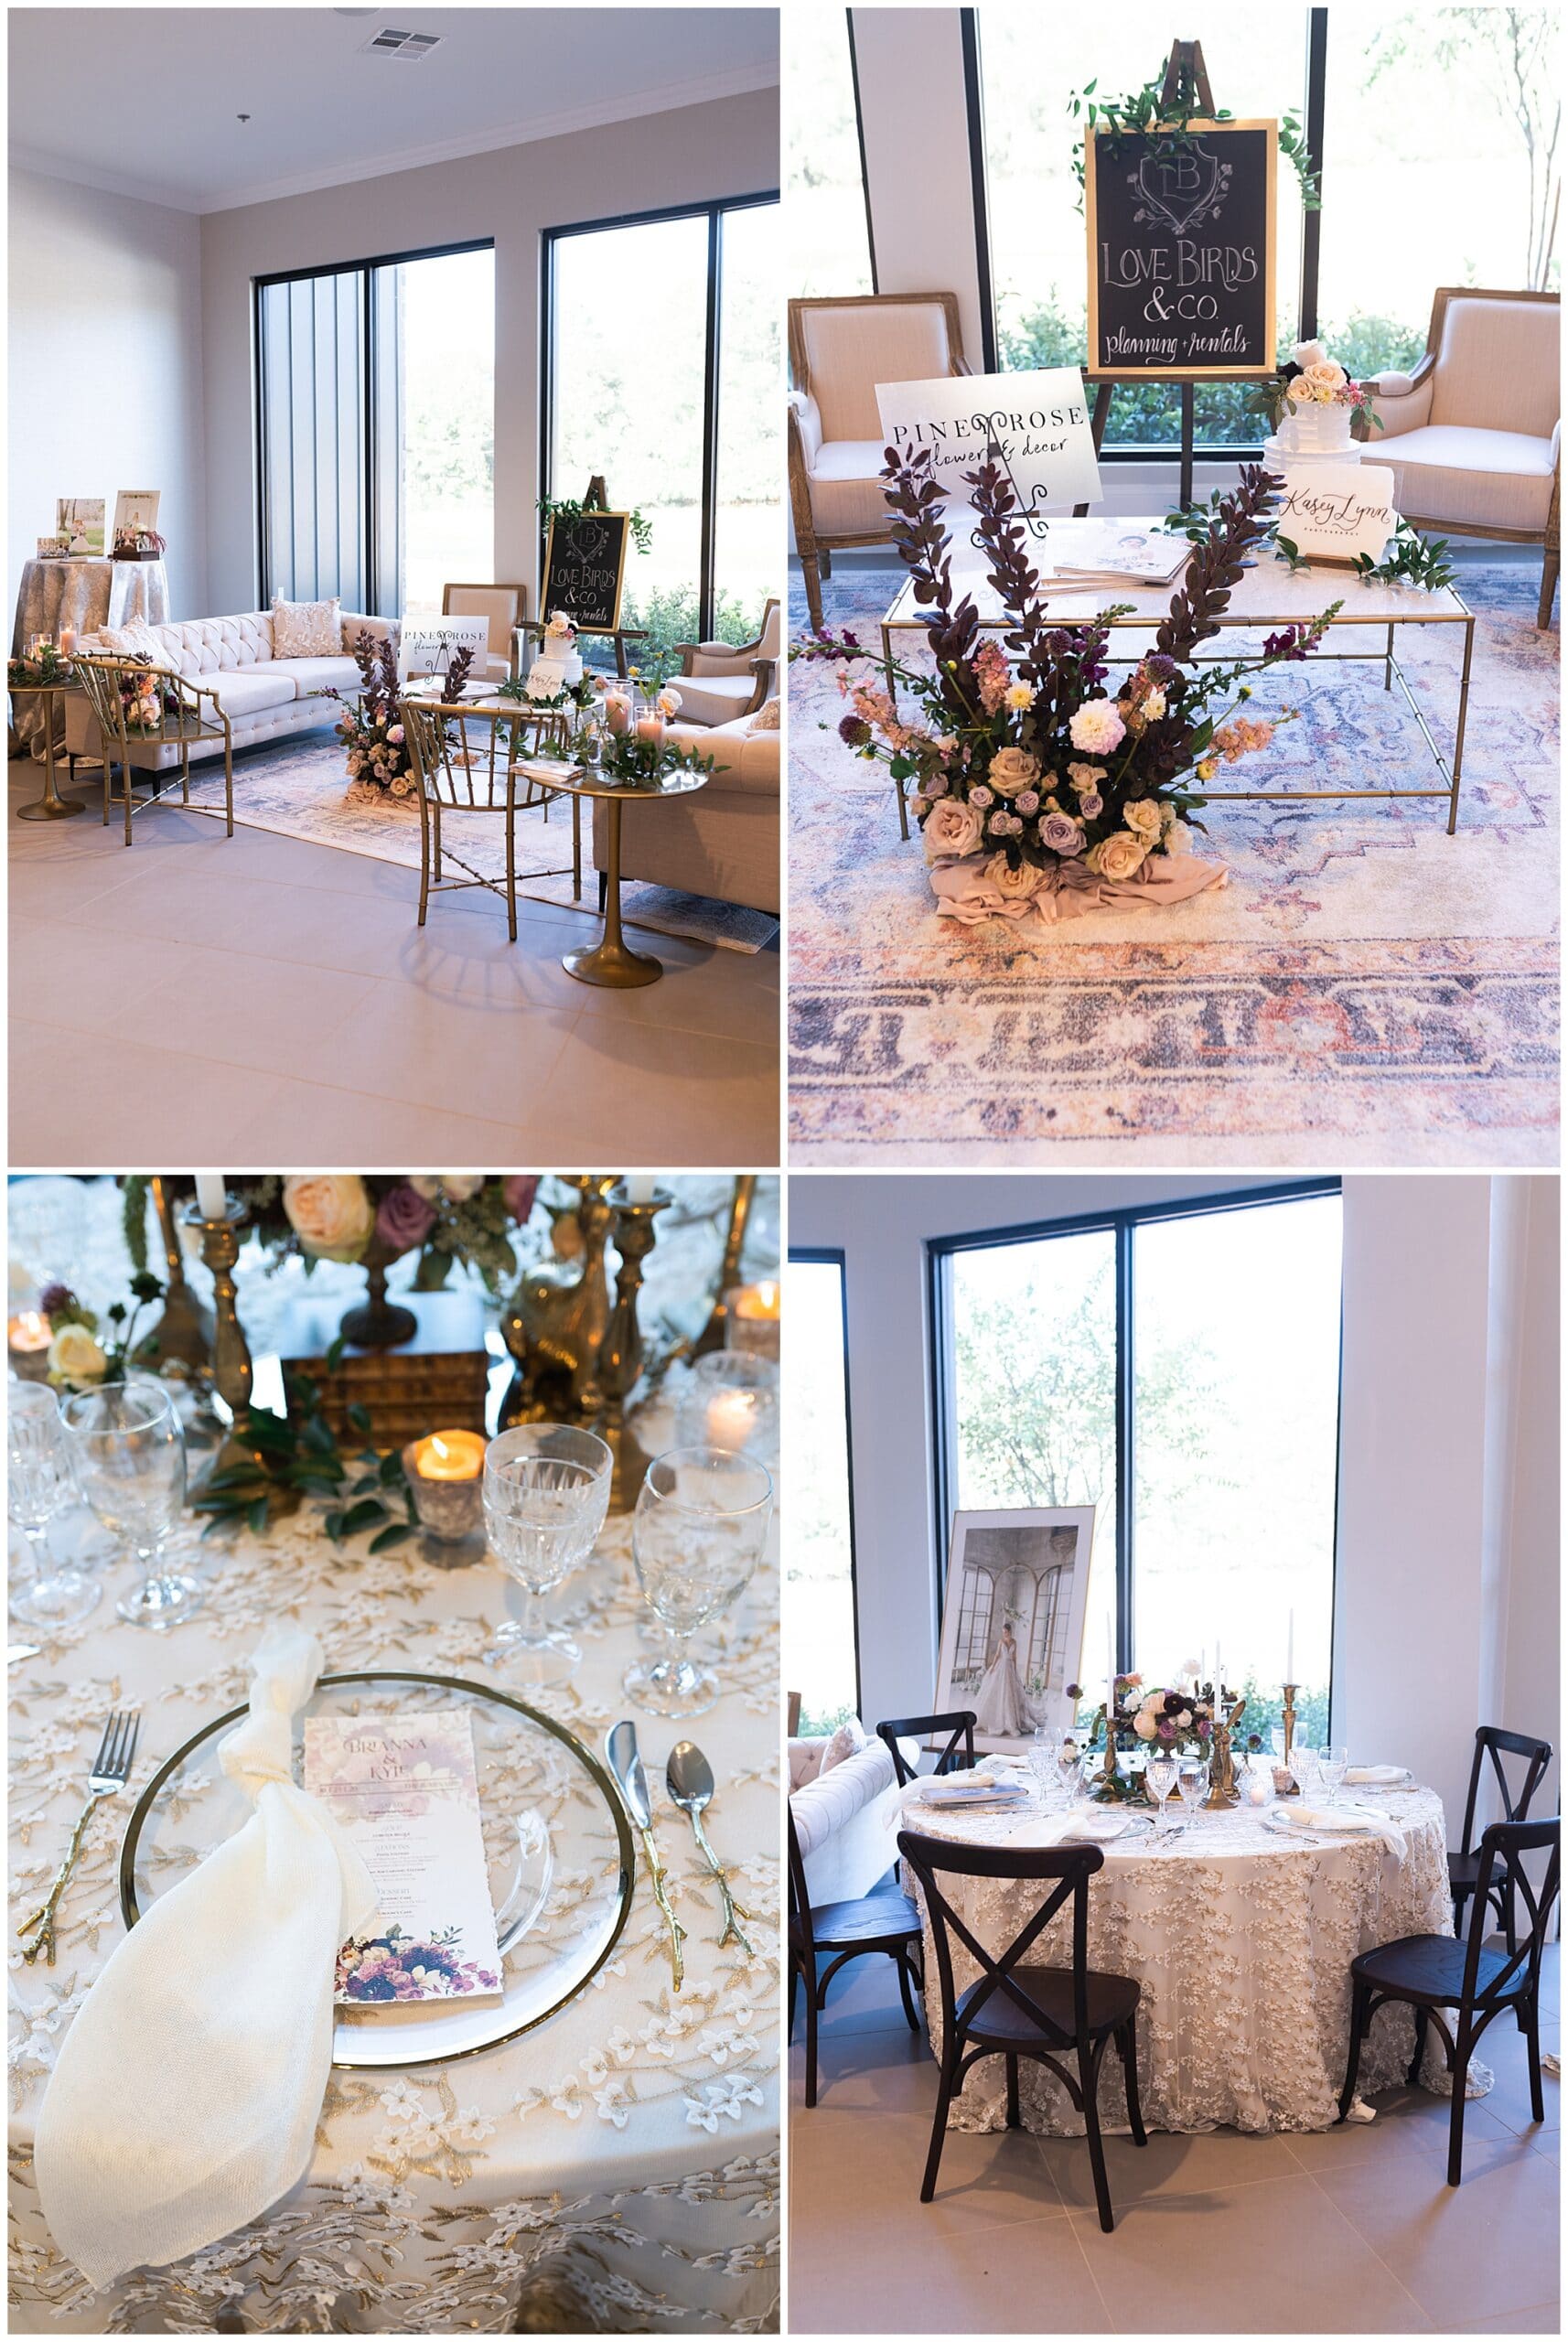 Houston wedding venue at their open house table setting for a wedding reception captured by Swish and Click Photography